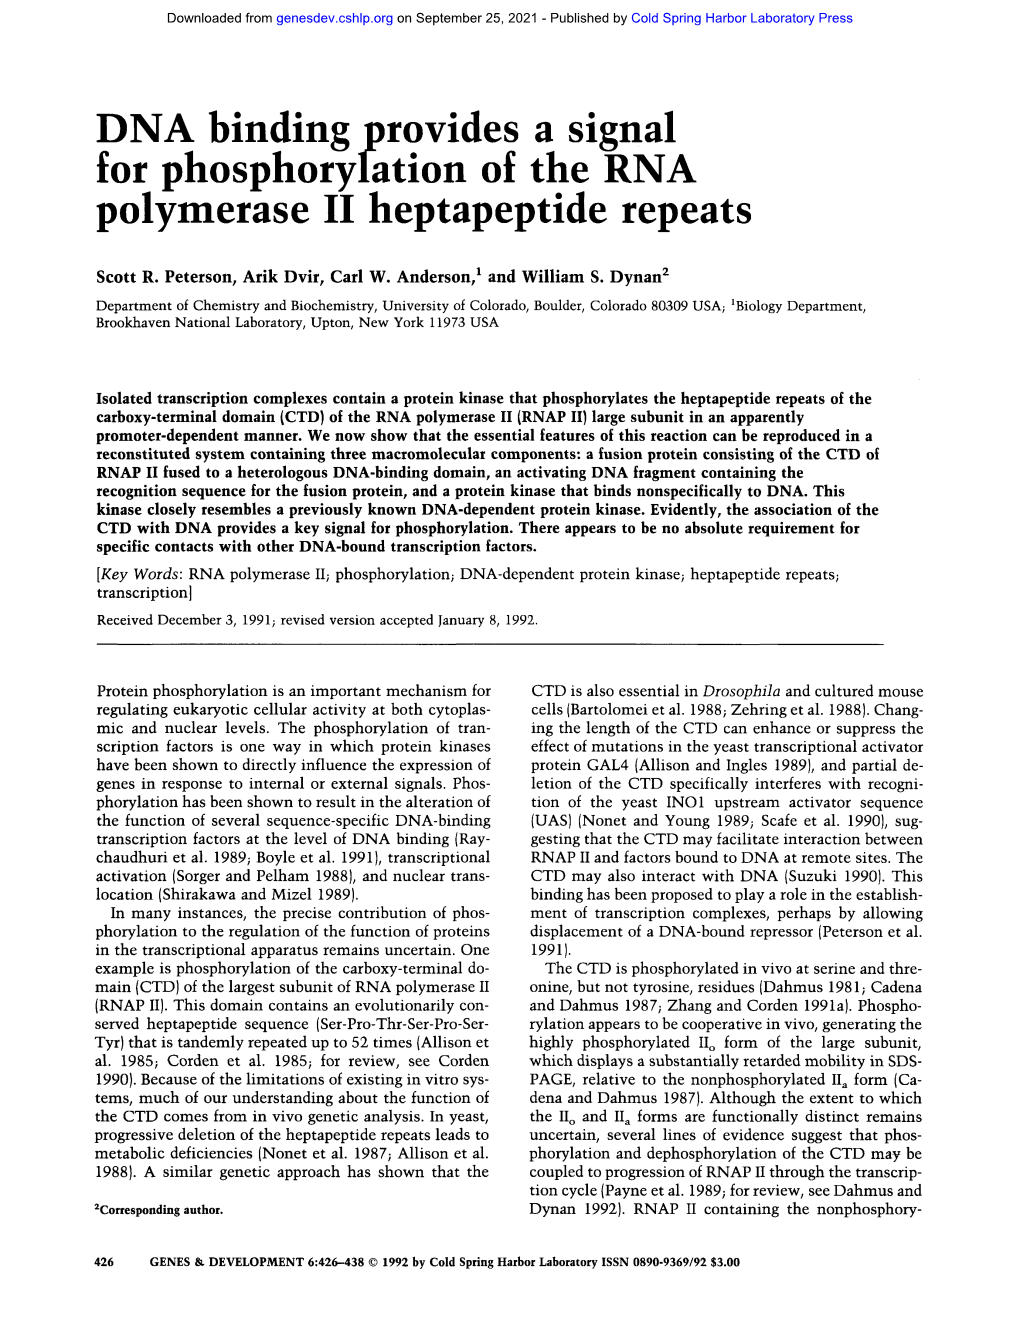 DNA Binding Provides a Signal for Phosphorylation of the RNA Polymerase II Heptapeptide Repeats